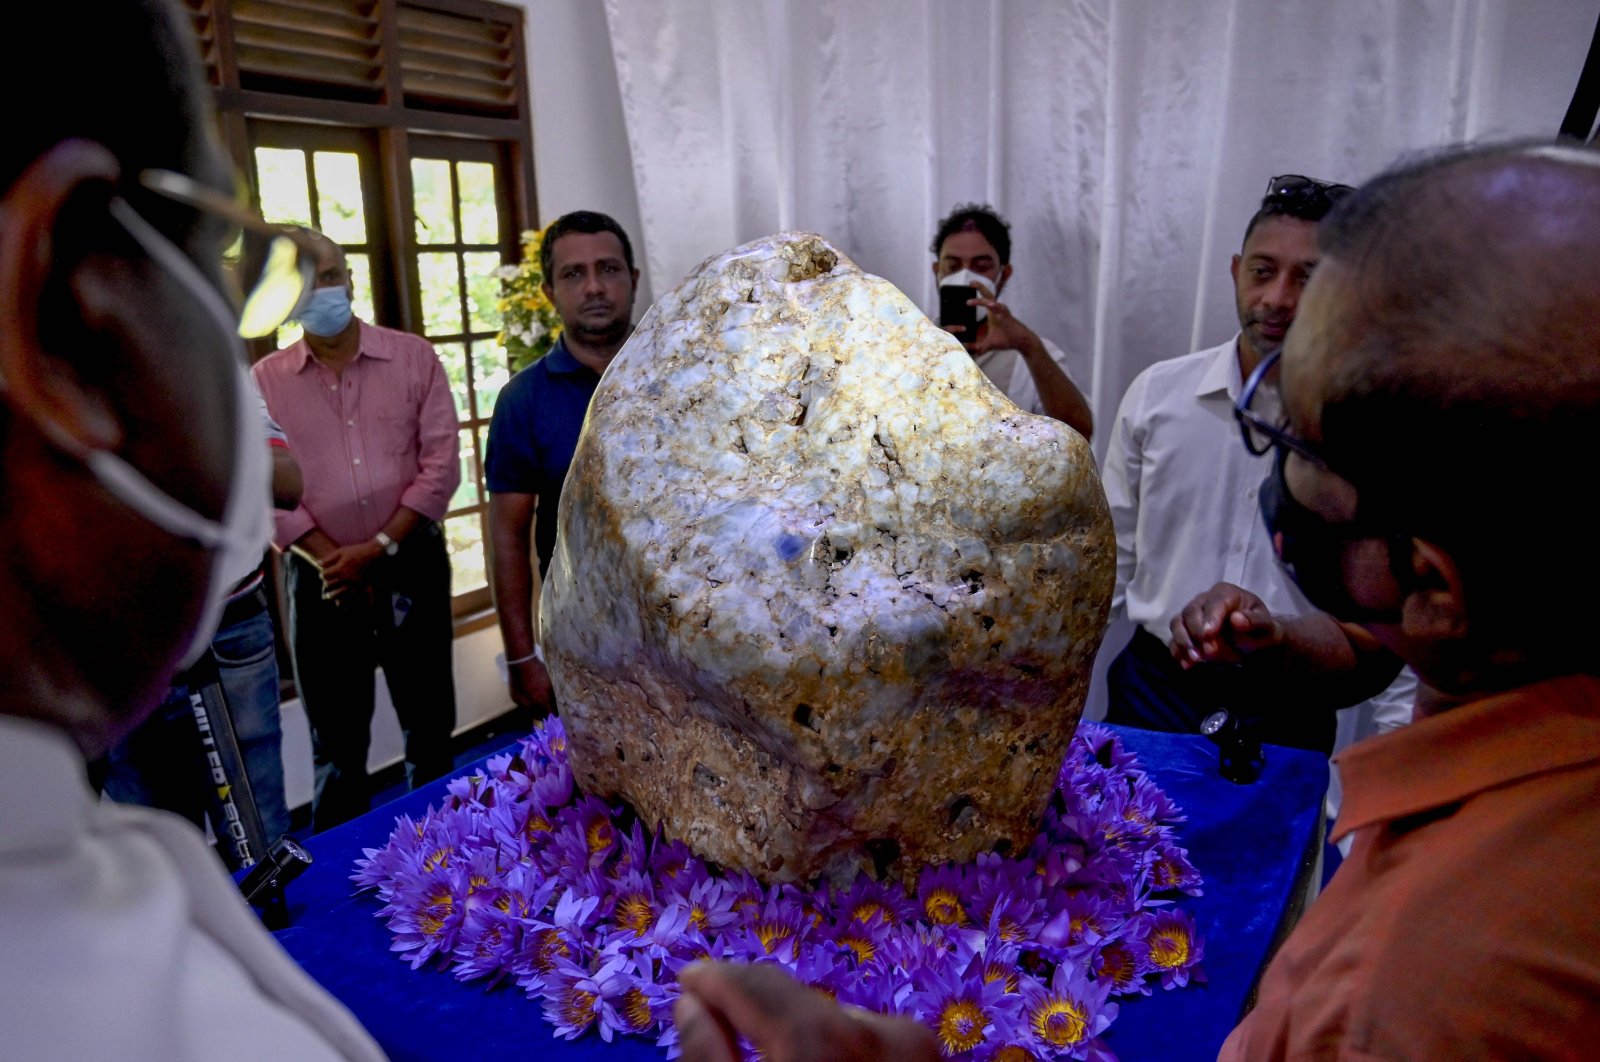 People inspect the single natural corundum (blue sapphire) named "Queen of Asia," considered the largest found in the world, in Horana, some 45 kilometers from Colombo, Sri Lanka, Dec. 12, 2021. (AFP Photo)